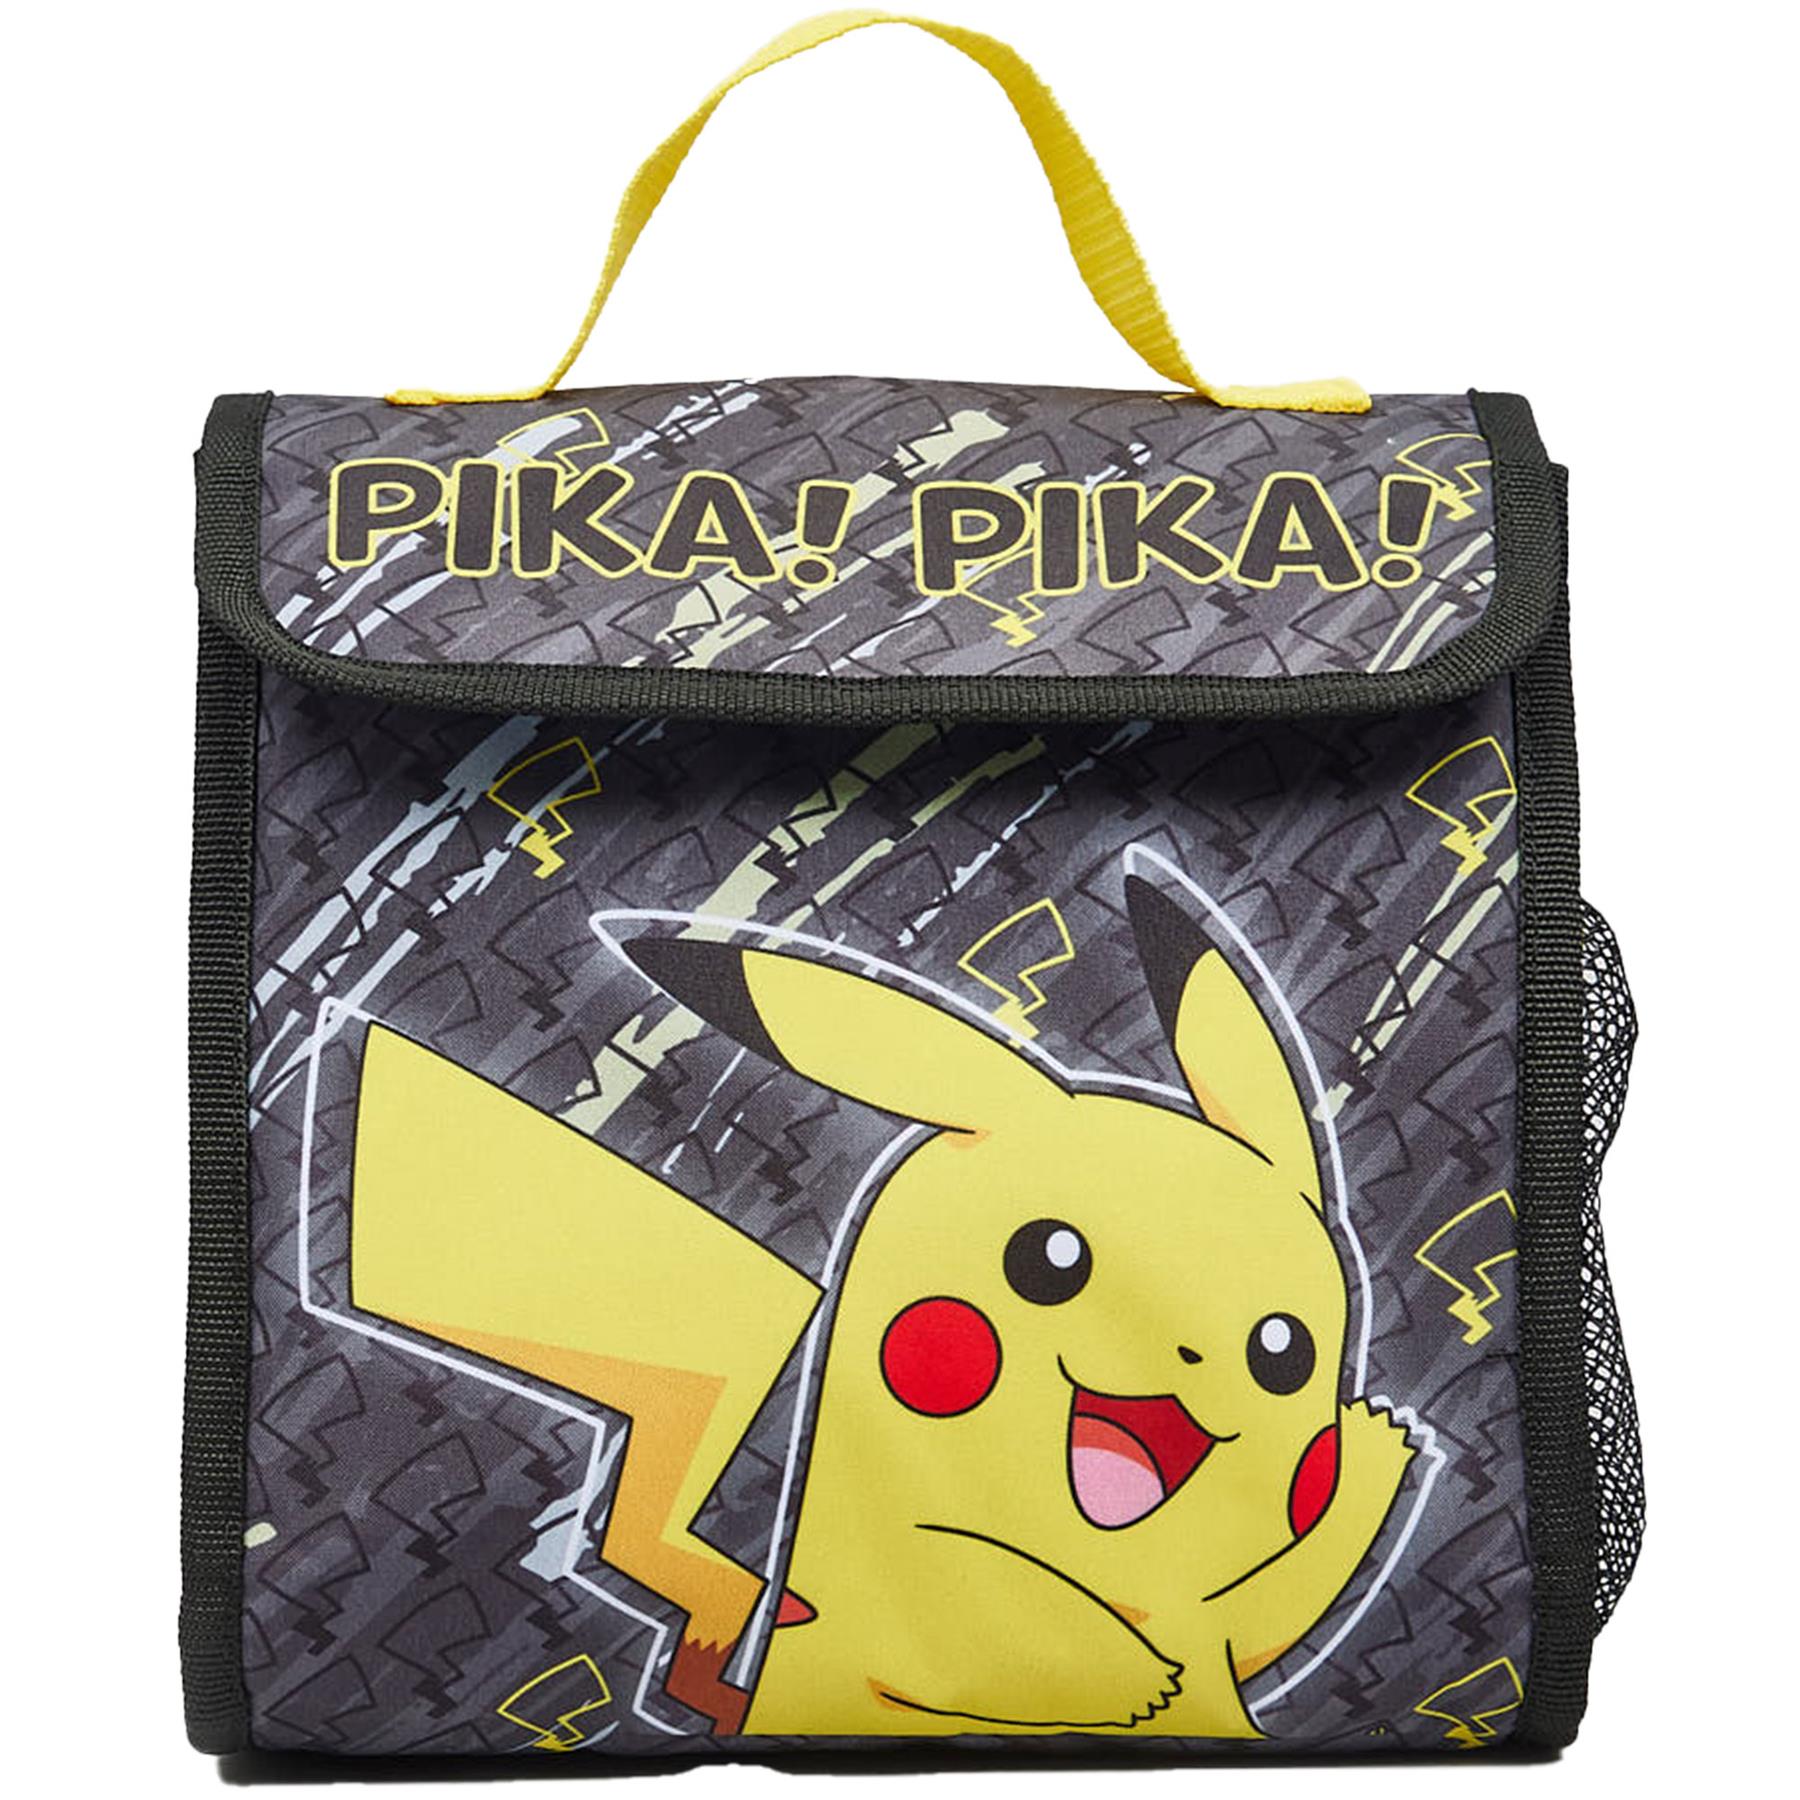 Kids Officially Licensed Pokemon Pikachu Lunch Bag With Side Mesh Pocket